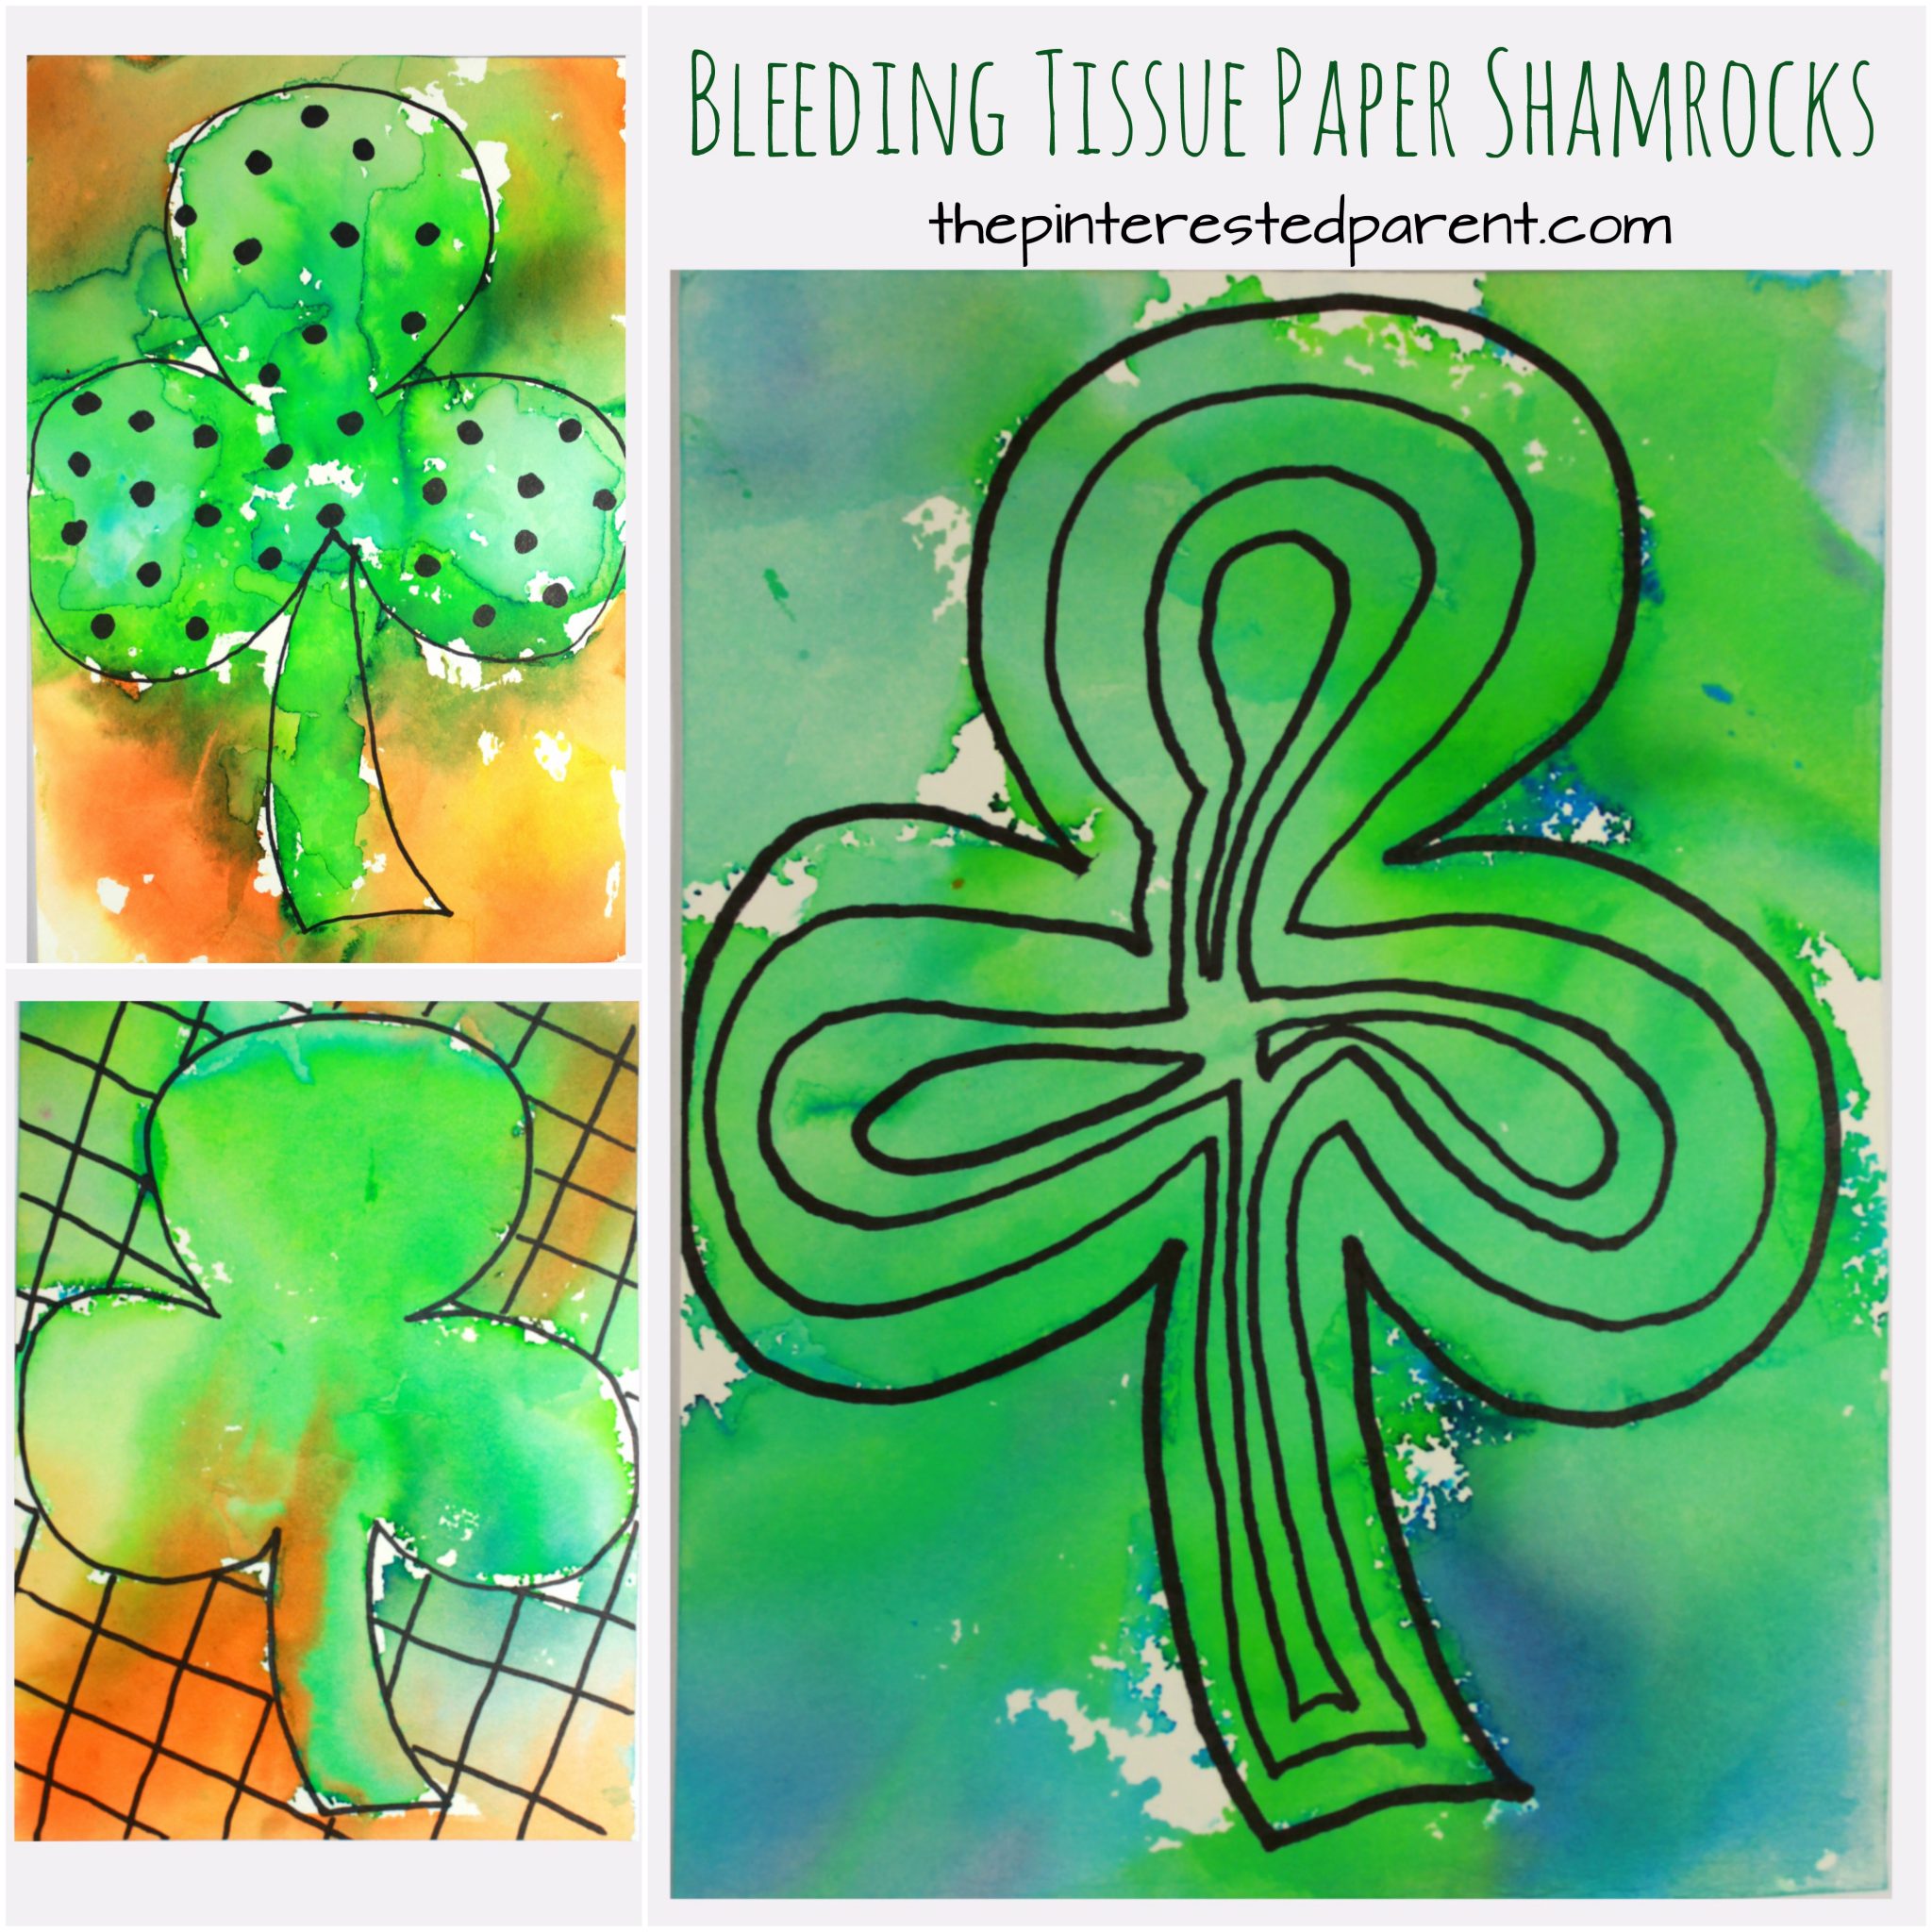 Bleeding tissue paper shamrocks for St. Patrick's Day. Easy arts and crafts art ideas and painting for preschoolers and kids.